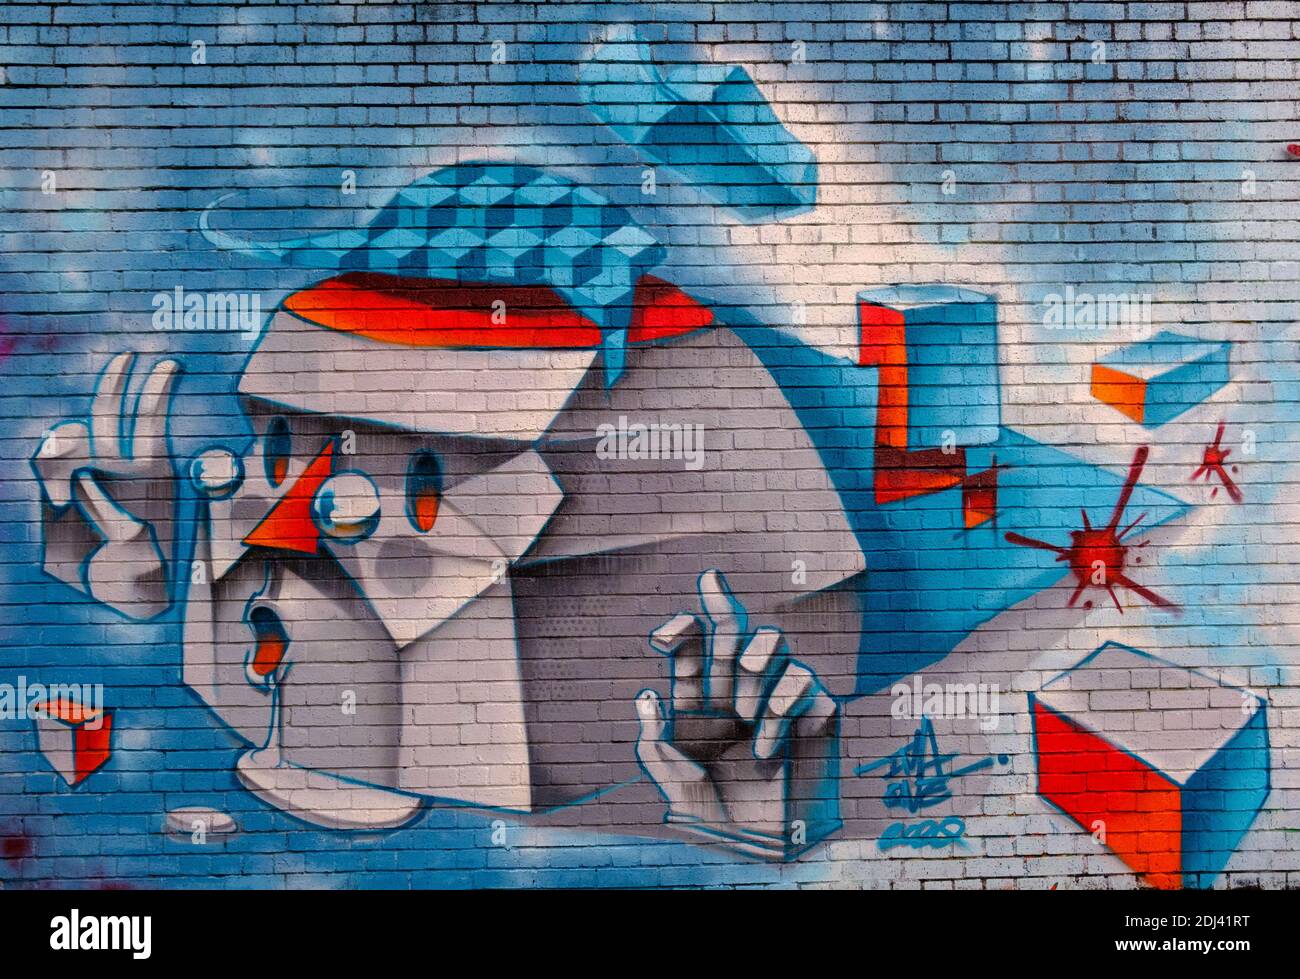 Bright colourful graffiti by street artist Ima One on the walls at Grey Eagle Street, Shoreditch, East London, UK Stock Photo